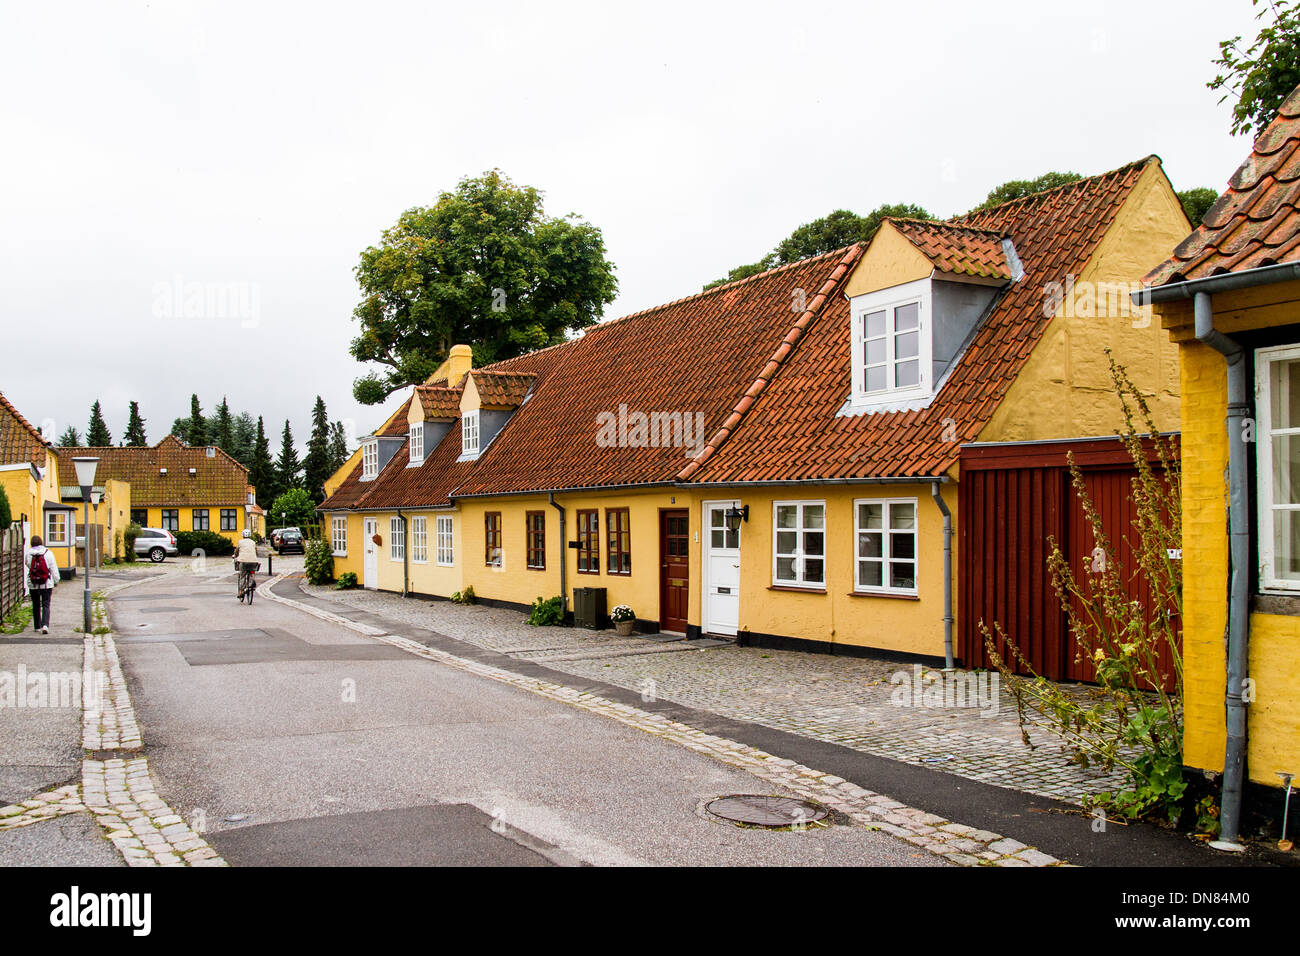 A village street in the historic rural town of Maribo denmark Stock Photo -  Alamy